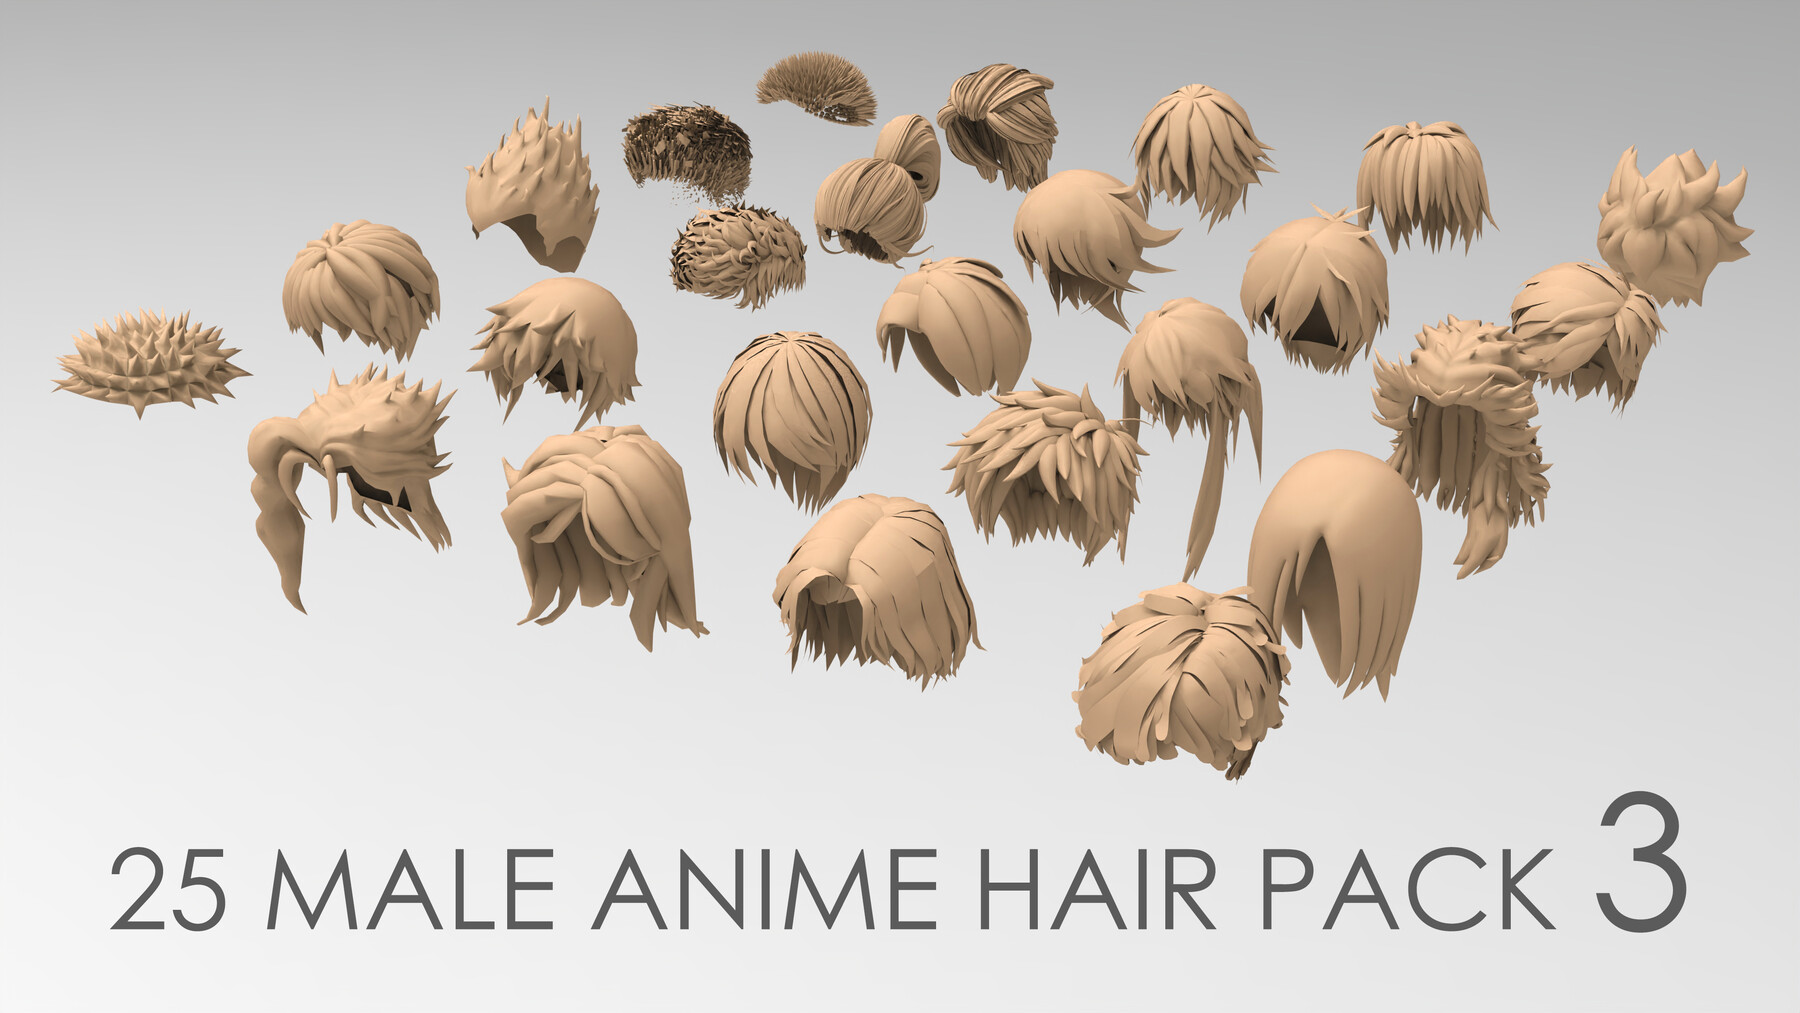 Pin by Yi Rui Soong on Anime | Anime hairstyles male, Anime characters male,  Anime boy hair